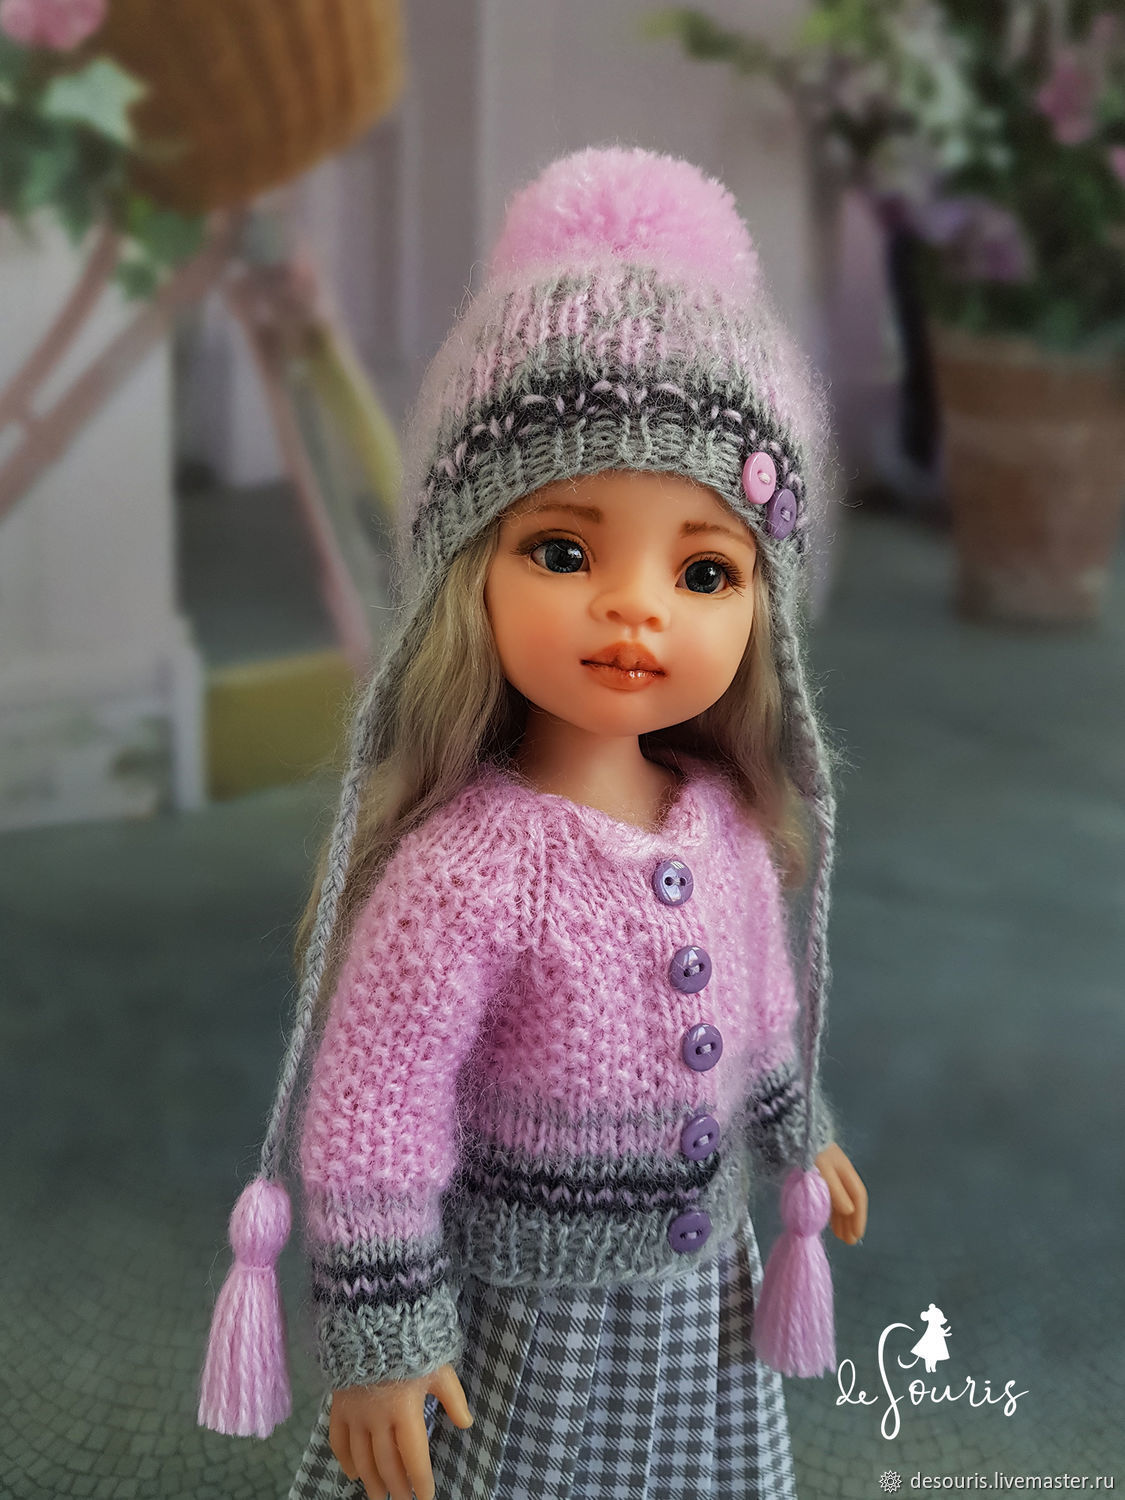 doll clothes Paola Reina doll height 32 cm Doll Coat ,